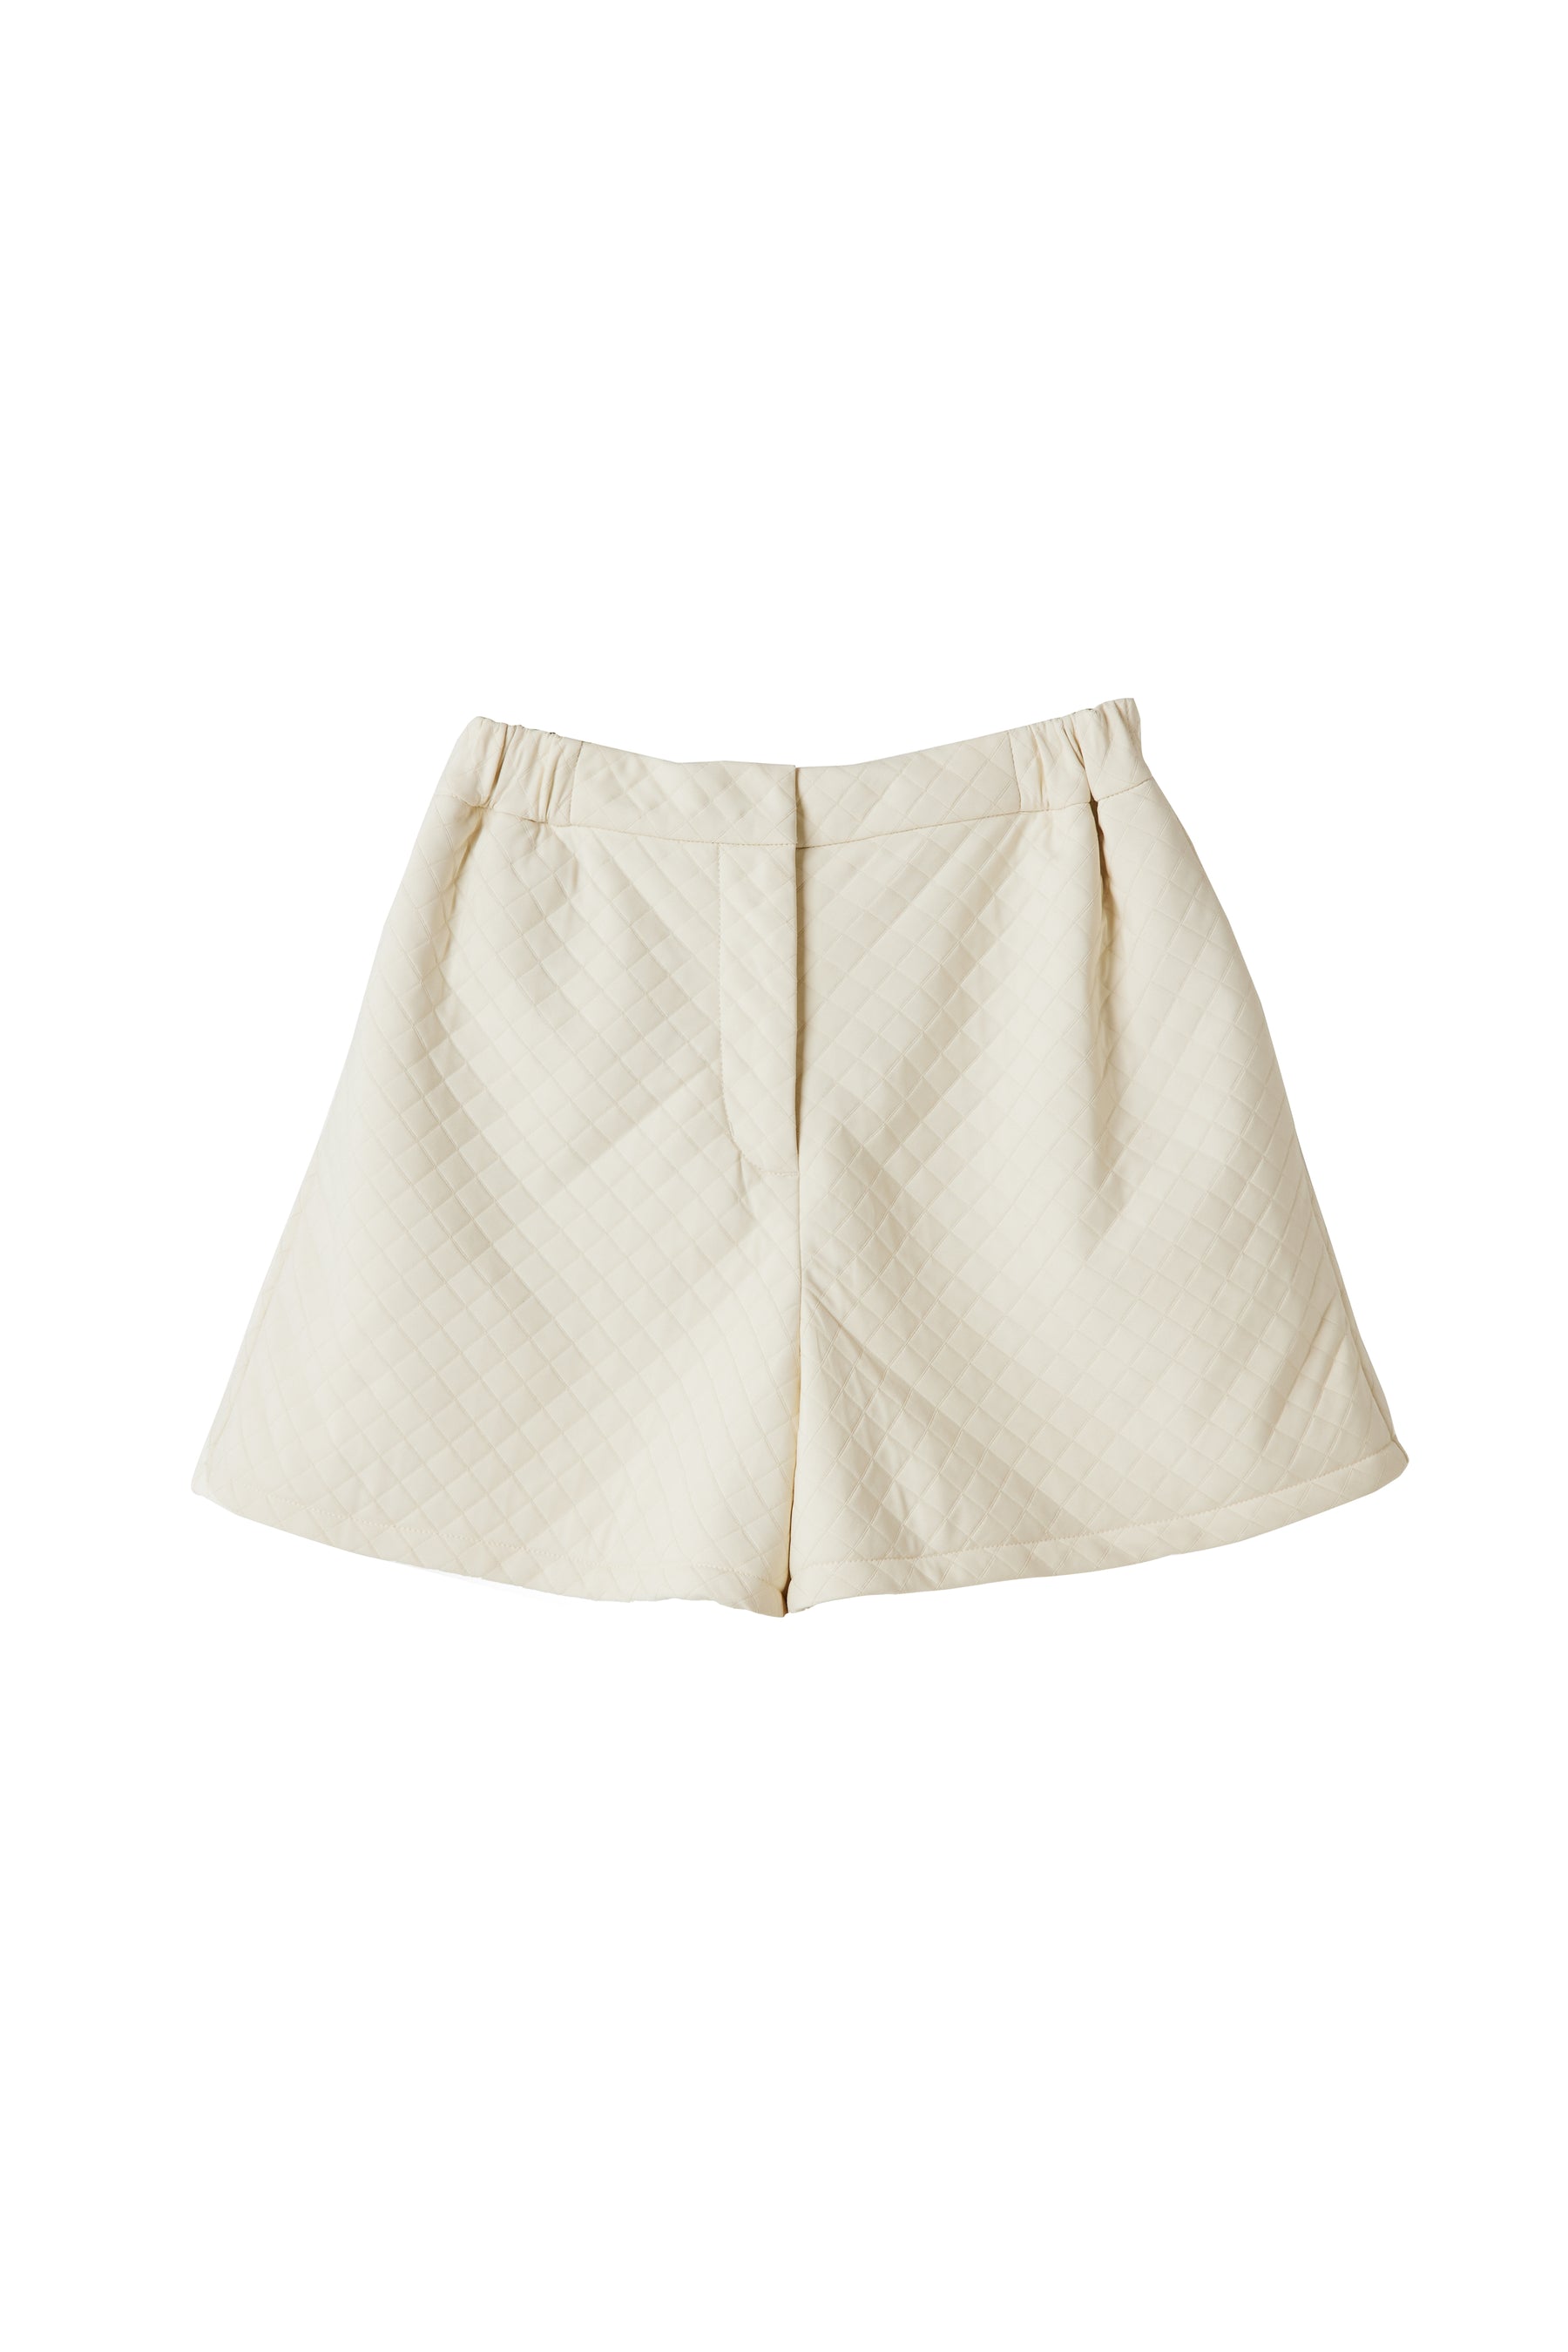 her lip to Quilted Flare Bell Shorts 【新品本物】 - パンツ